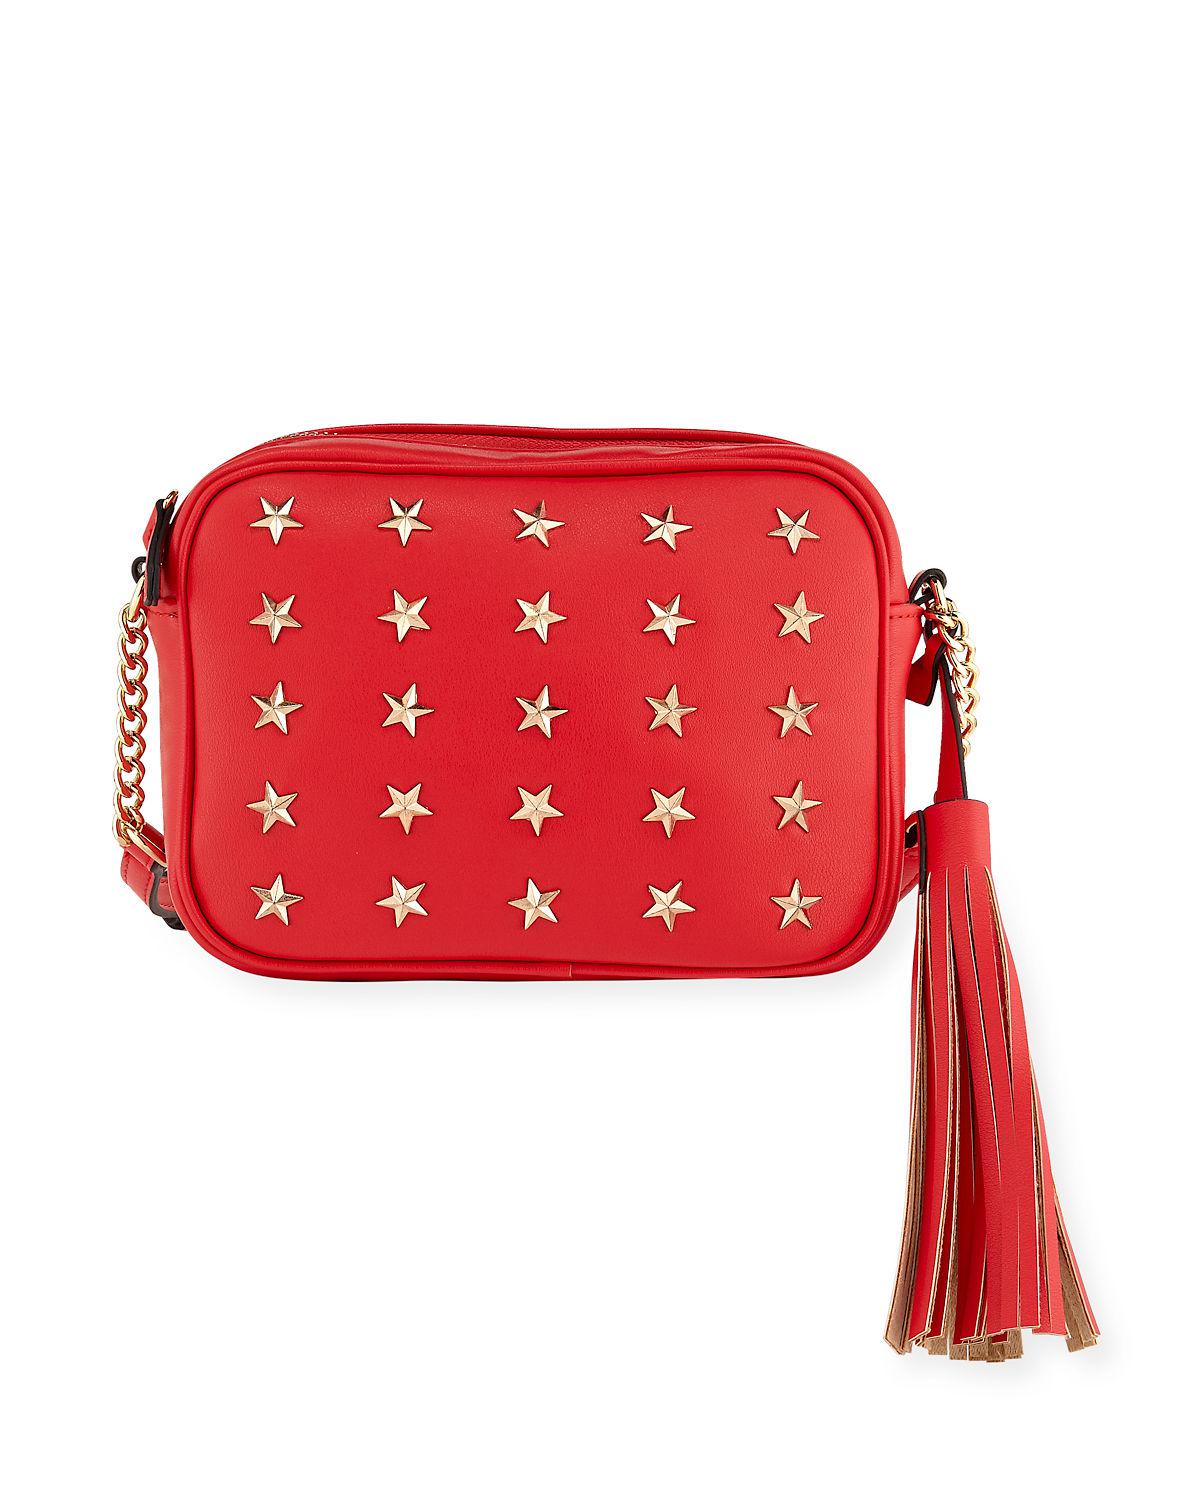 Lyst - Neiman Marcus Roz Star-studded Crossbody Bag in Red